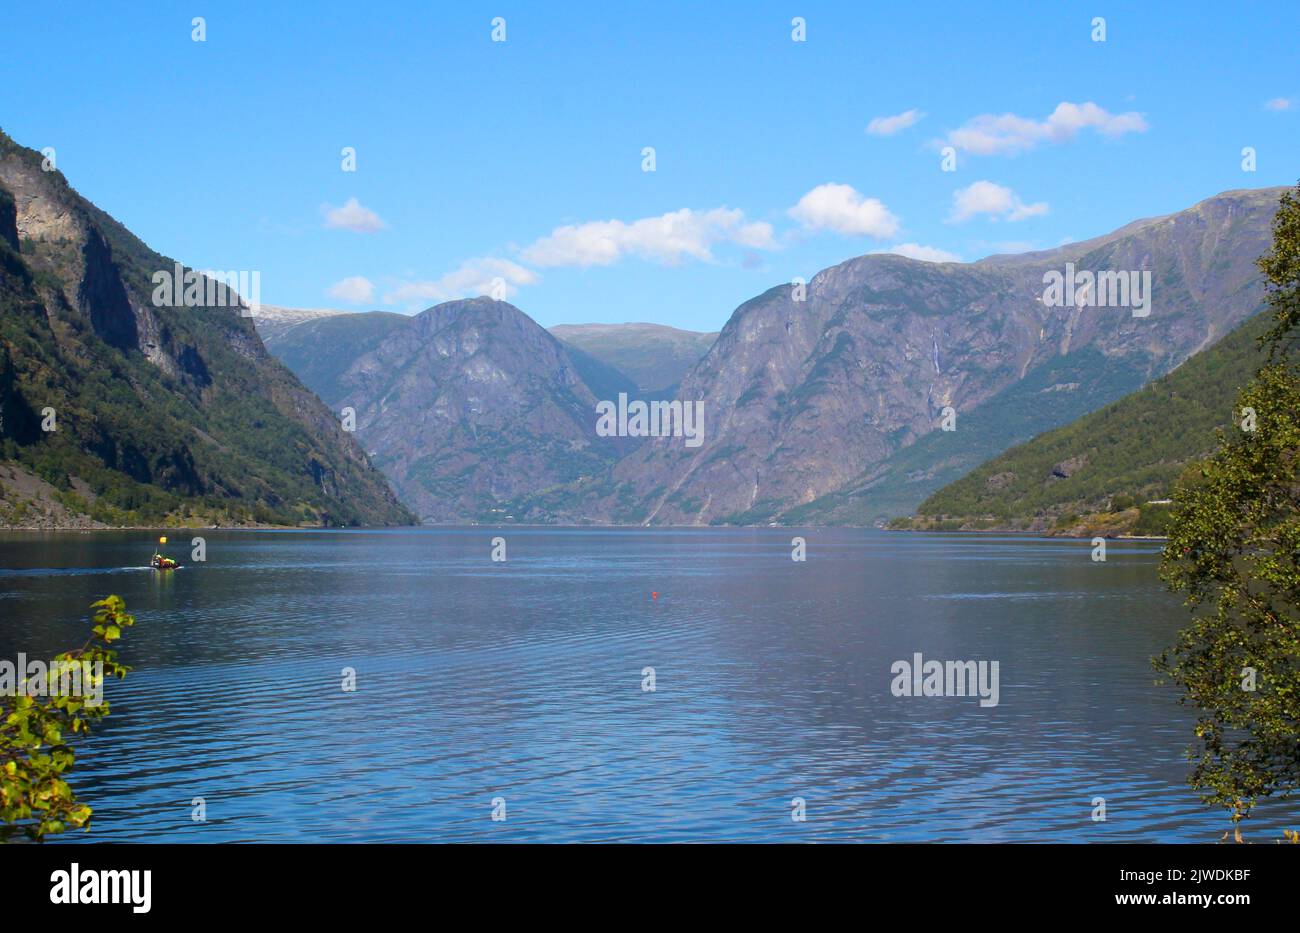 Views across the water in Aurlandsfjord from paths near Flam in Norway Stock Photo